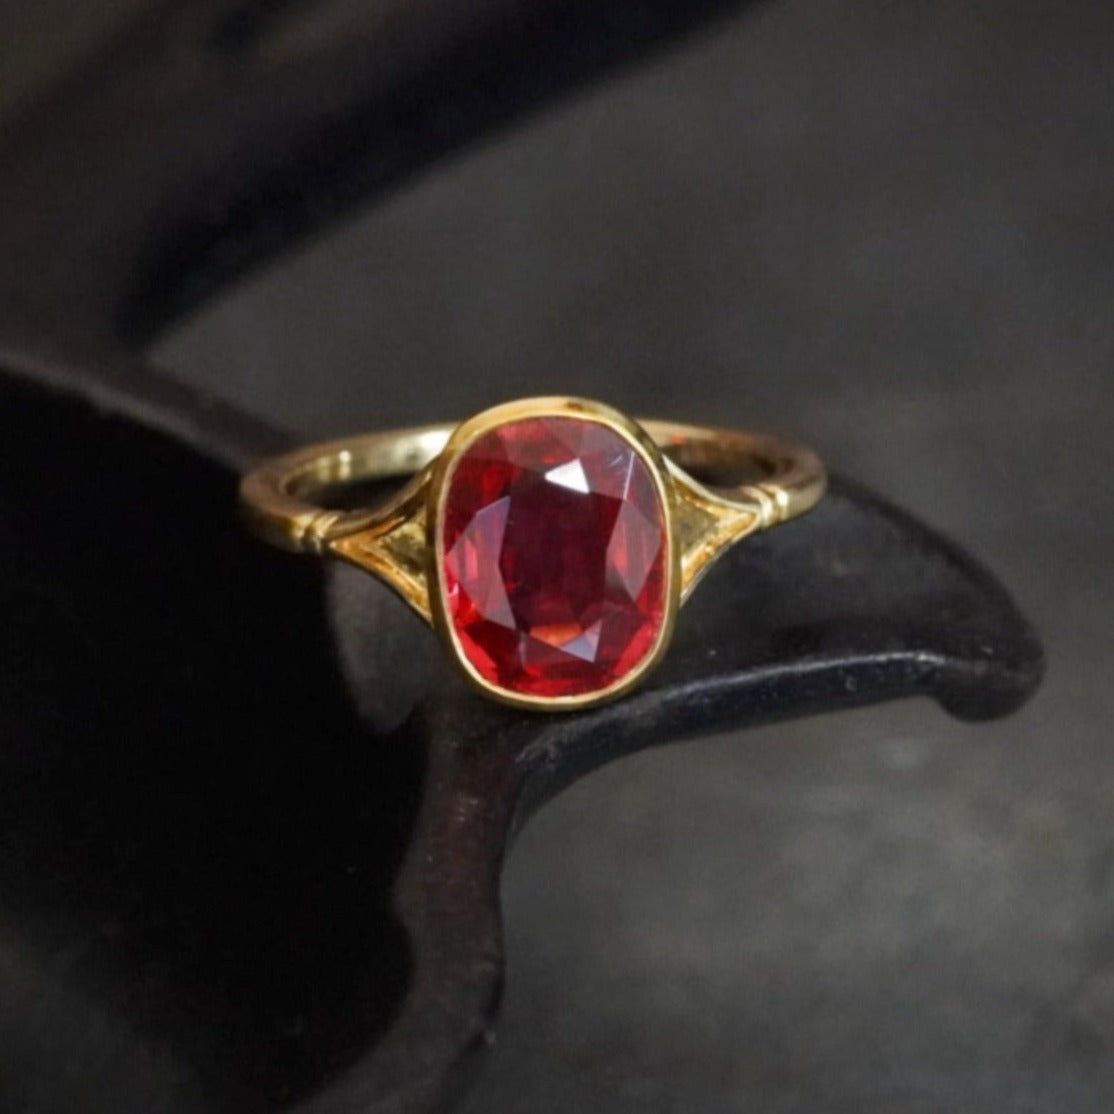  Jogani 2.75 CT Cherry-Red Spinel Ring 8